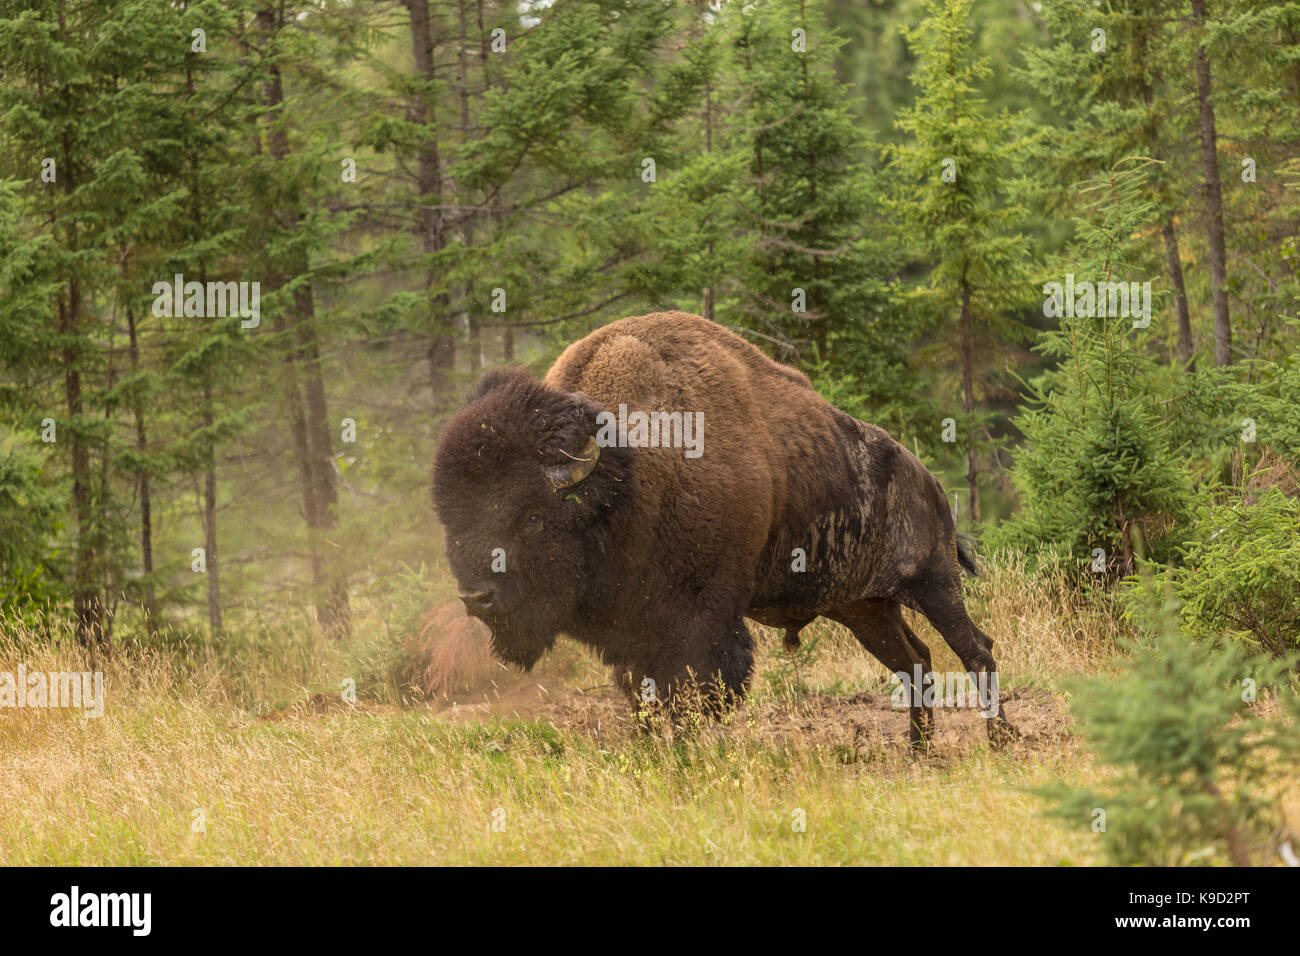 An American Bison is seen at the Zoo Sauvage in St. Felicien, Quebec Friday August 25, 2017. Stock Photo